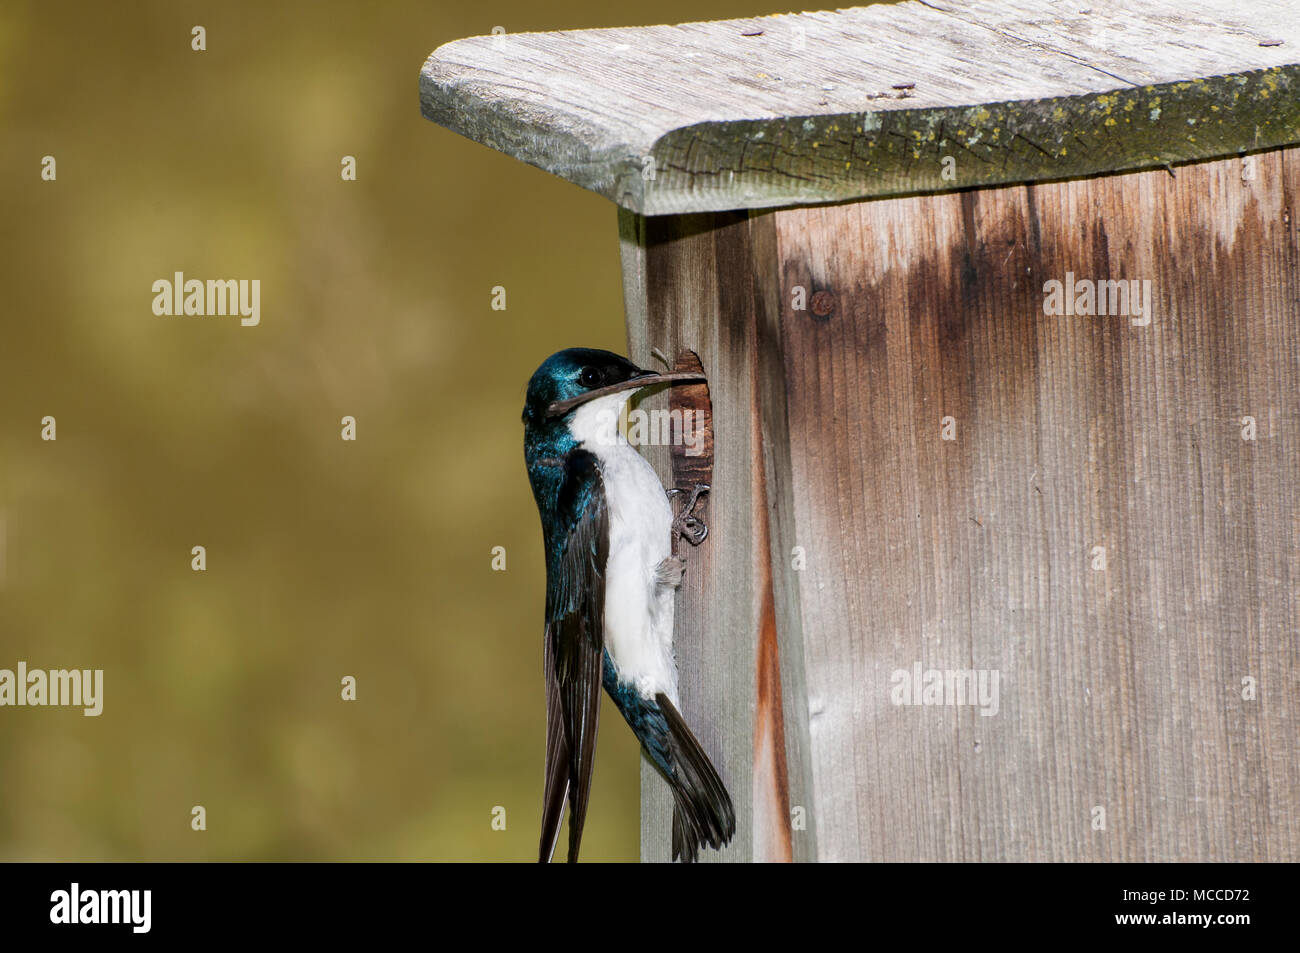 Little Canada, Minnesota. Gervais Park. Male Tree Swallow, Tachycineta bicolor, bringing nesting material to his mate to build a nest in the nesting b Stock Photo